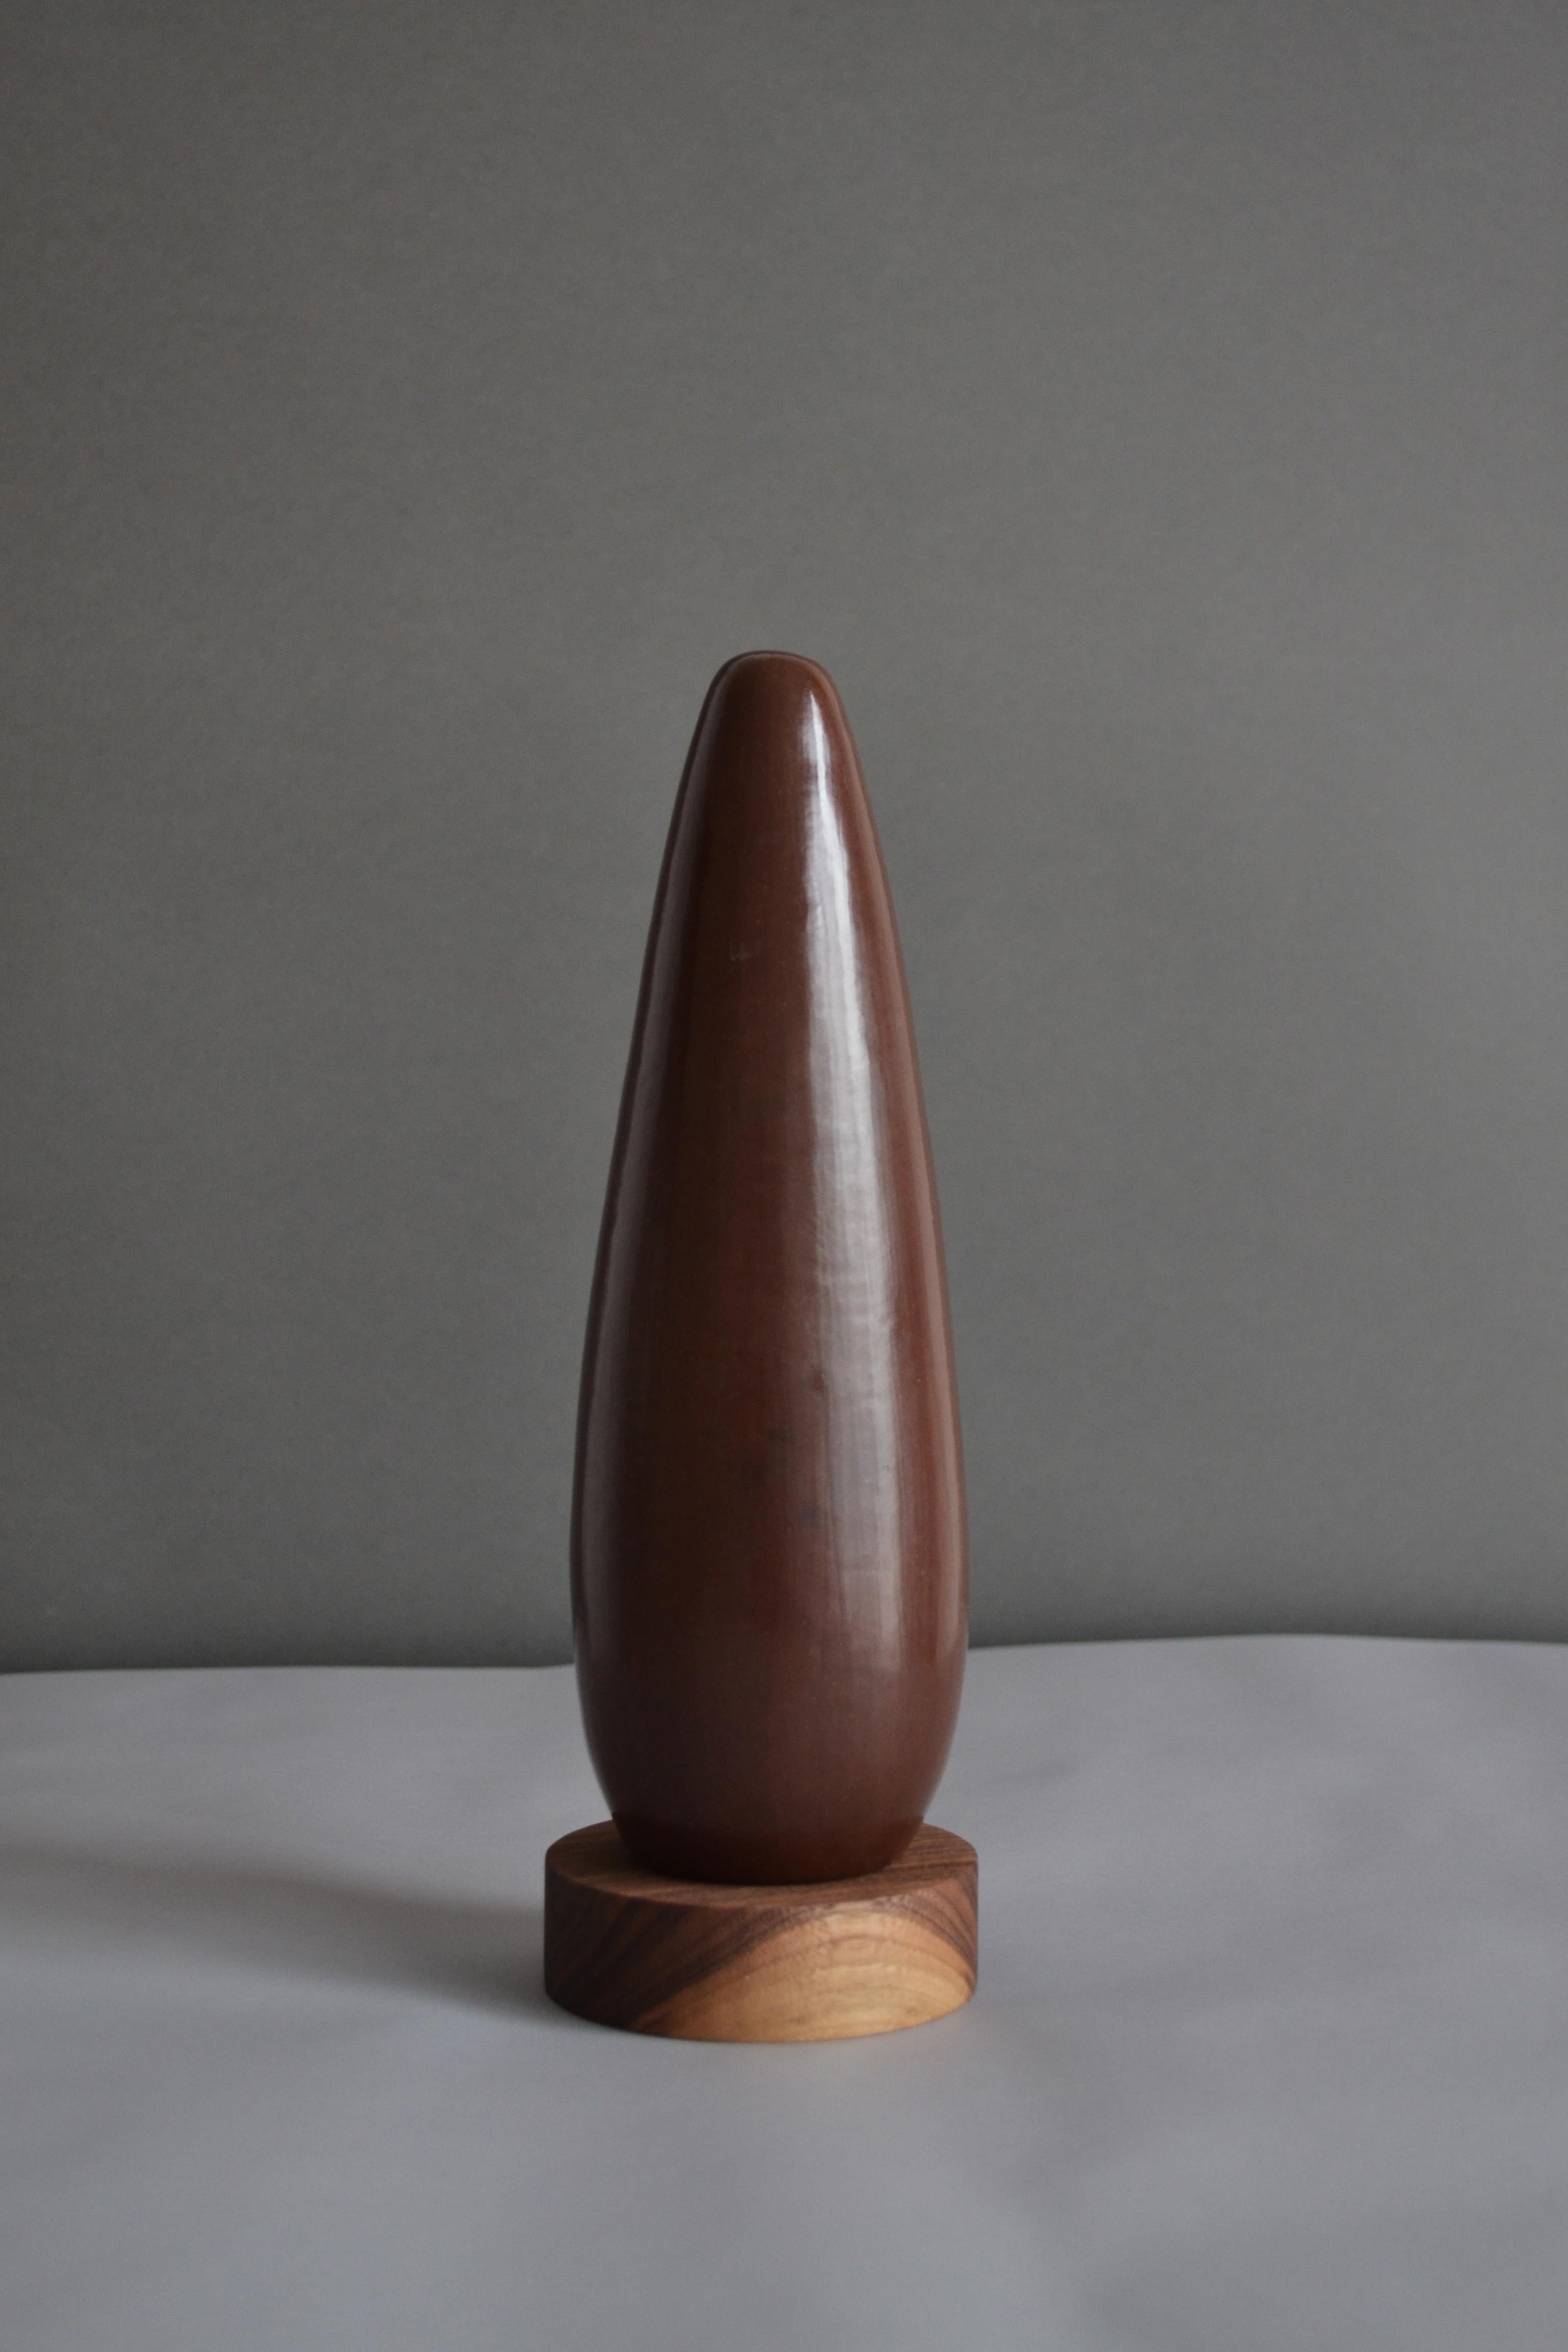 Silo is a sculpture that bases its beauty on the material in which it is made.
Made of wild clay from the Mixteca mountains, this clay is cleaned in filters for 20 days before being molded by hand, polished with crushed red stone to obtain this